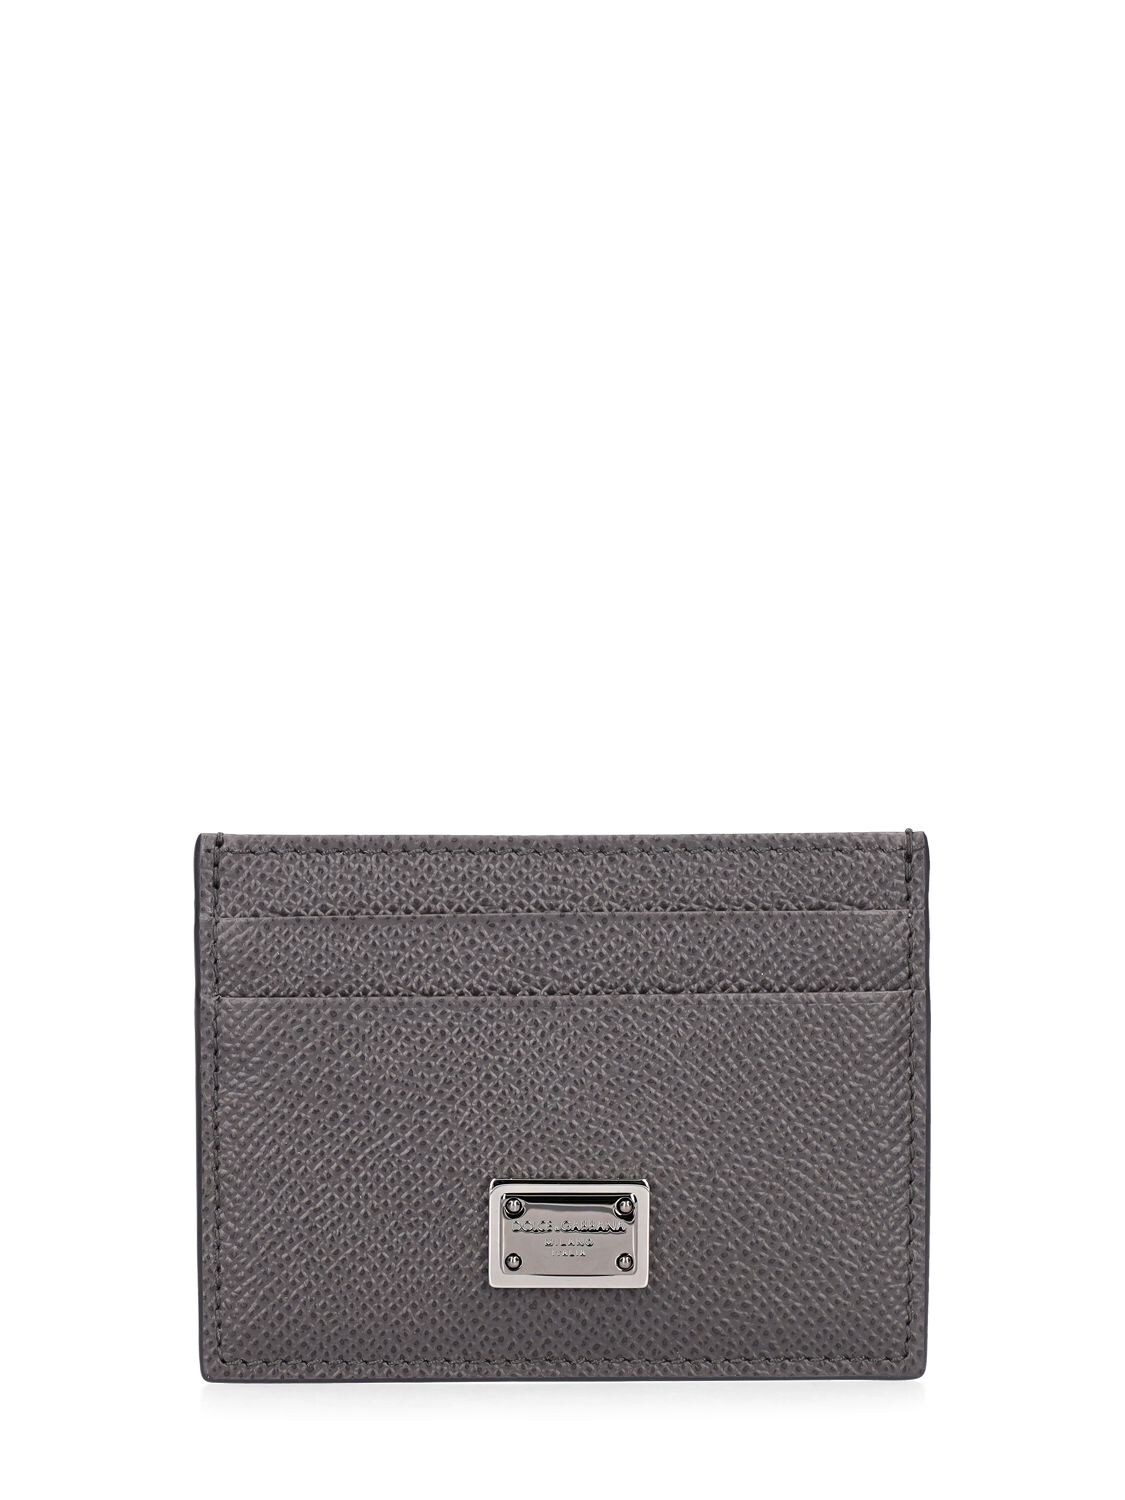 Dolce & Gabbana Logo Plaque Leather Card Holder In Canna Fucile